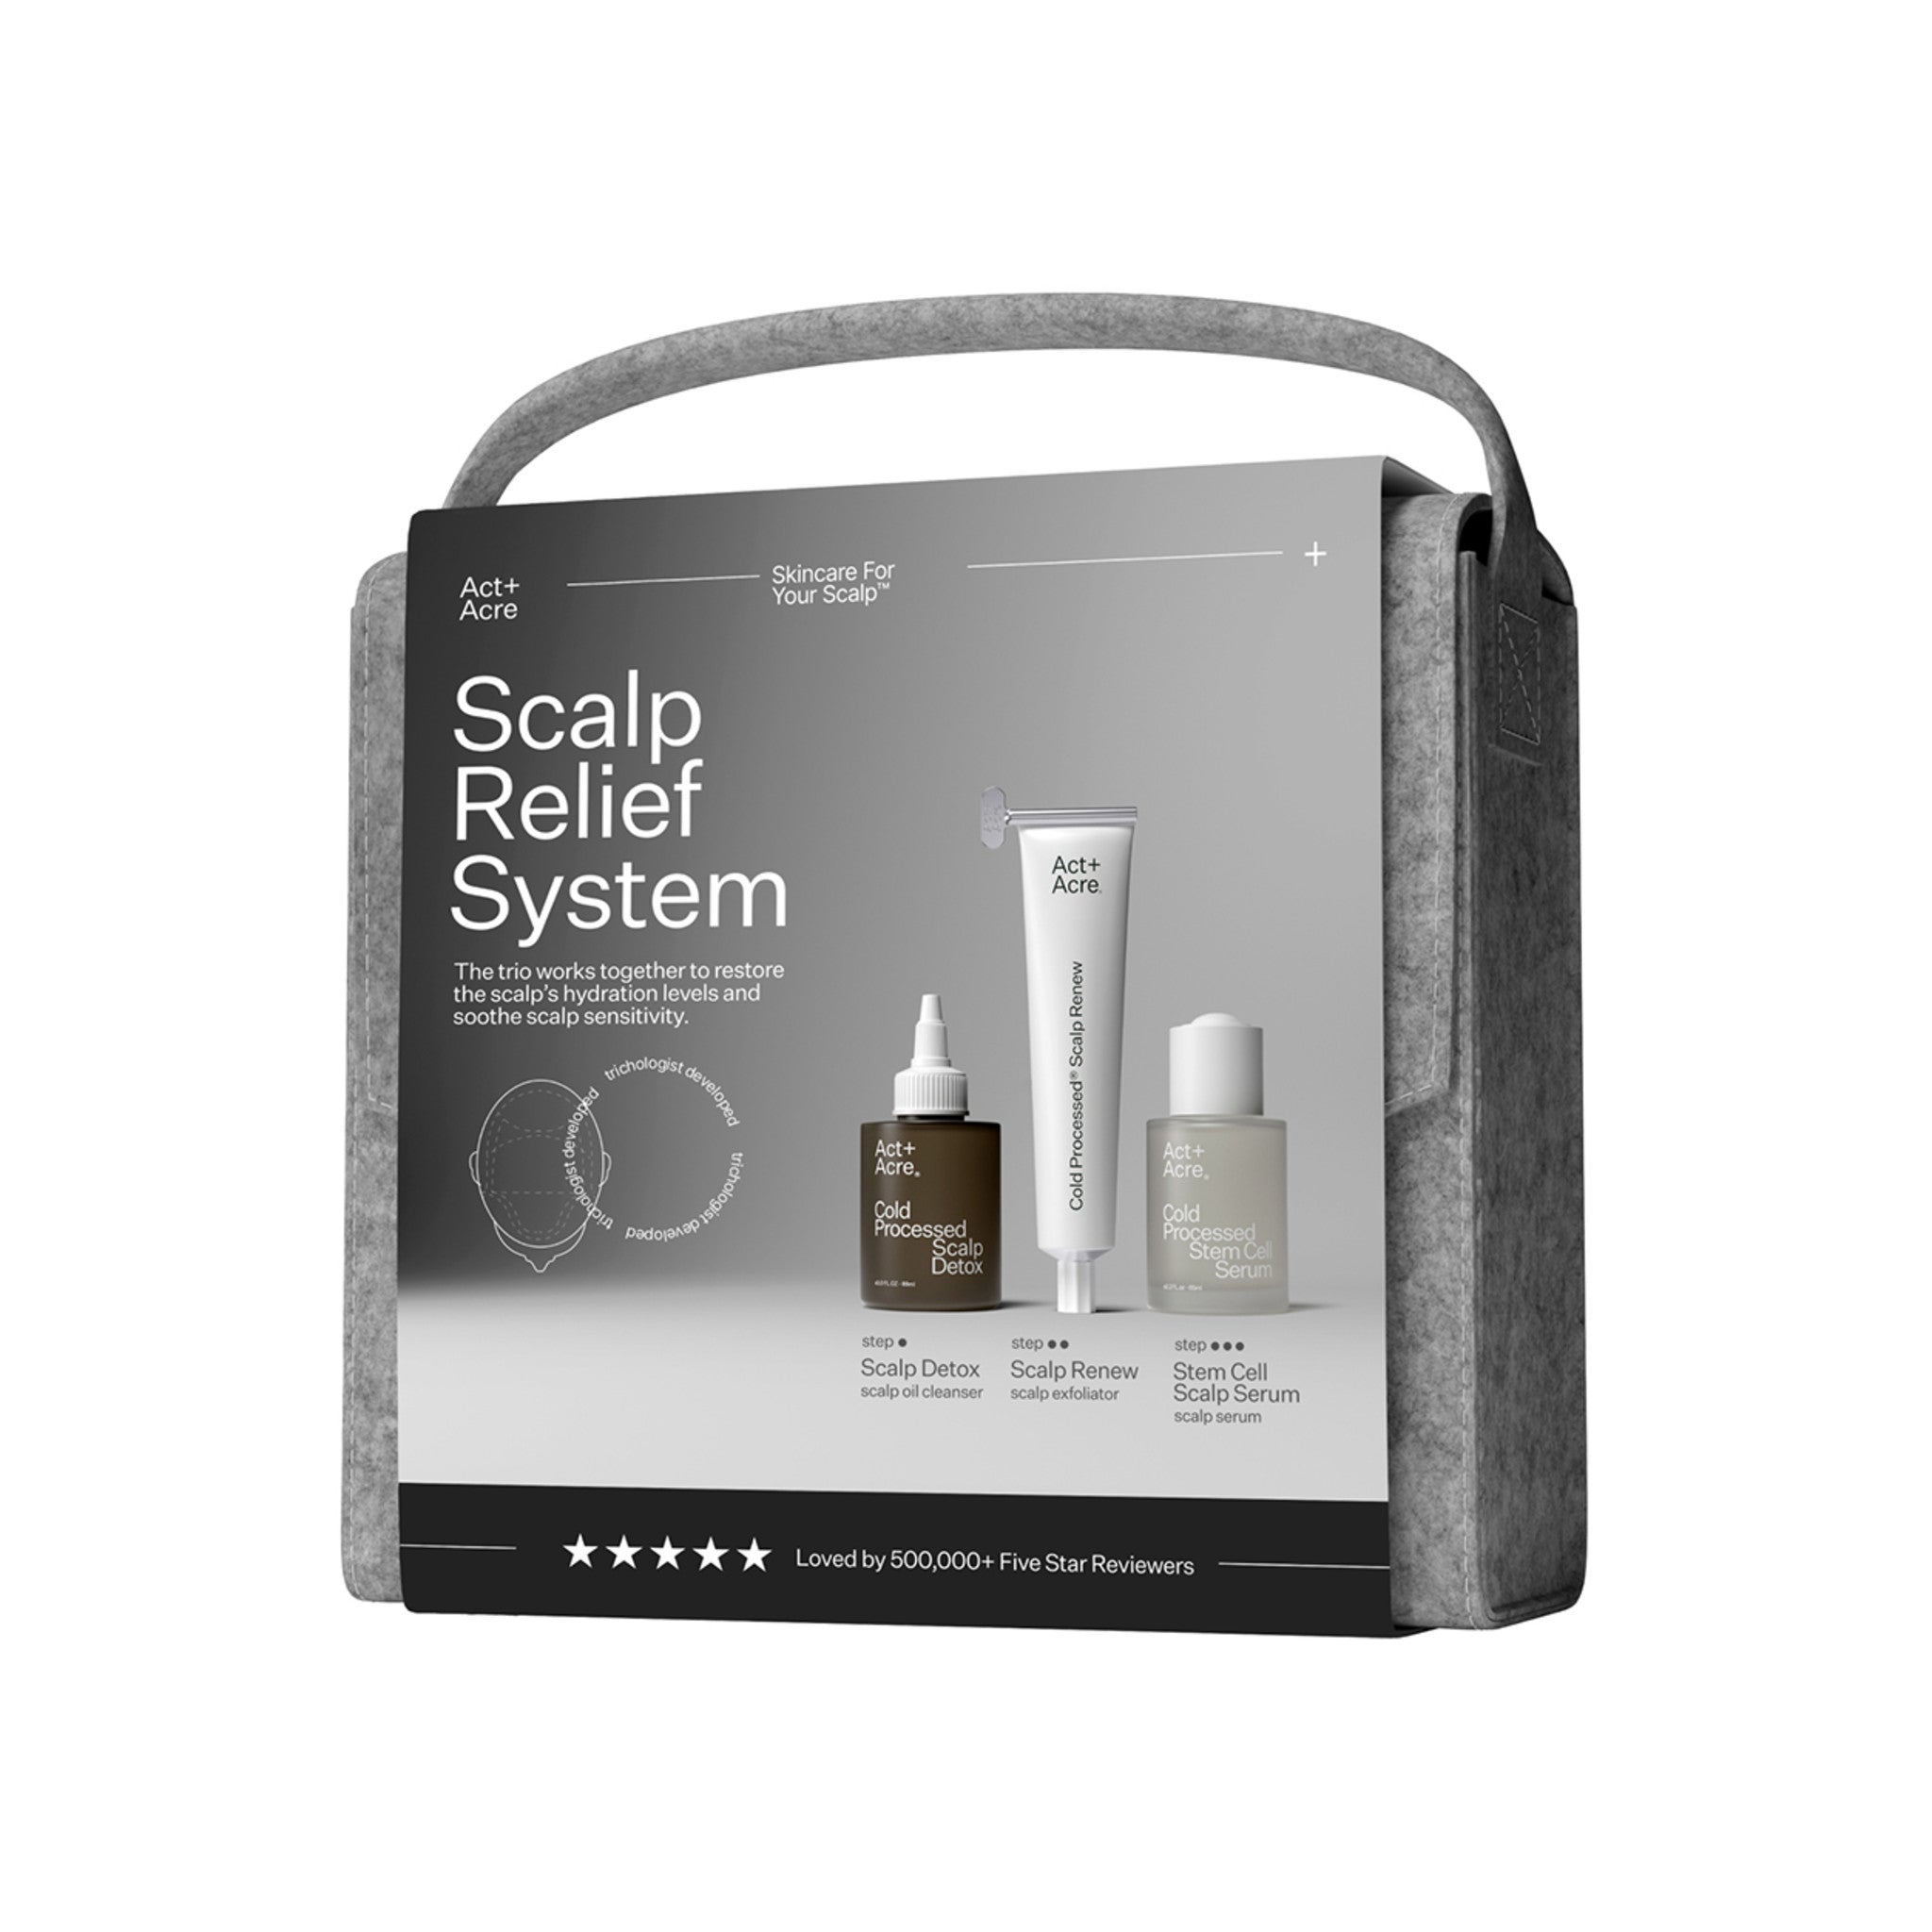 Scalp Relief System main image.